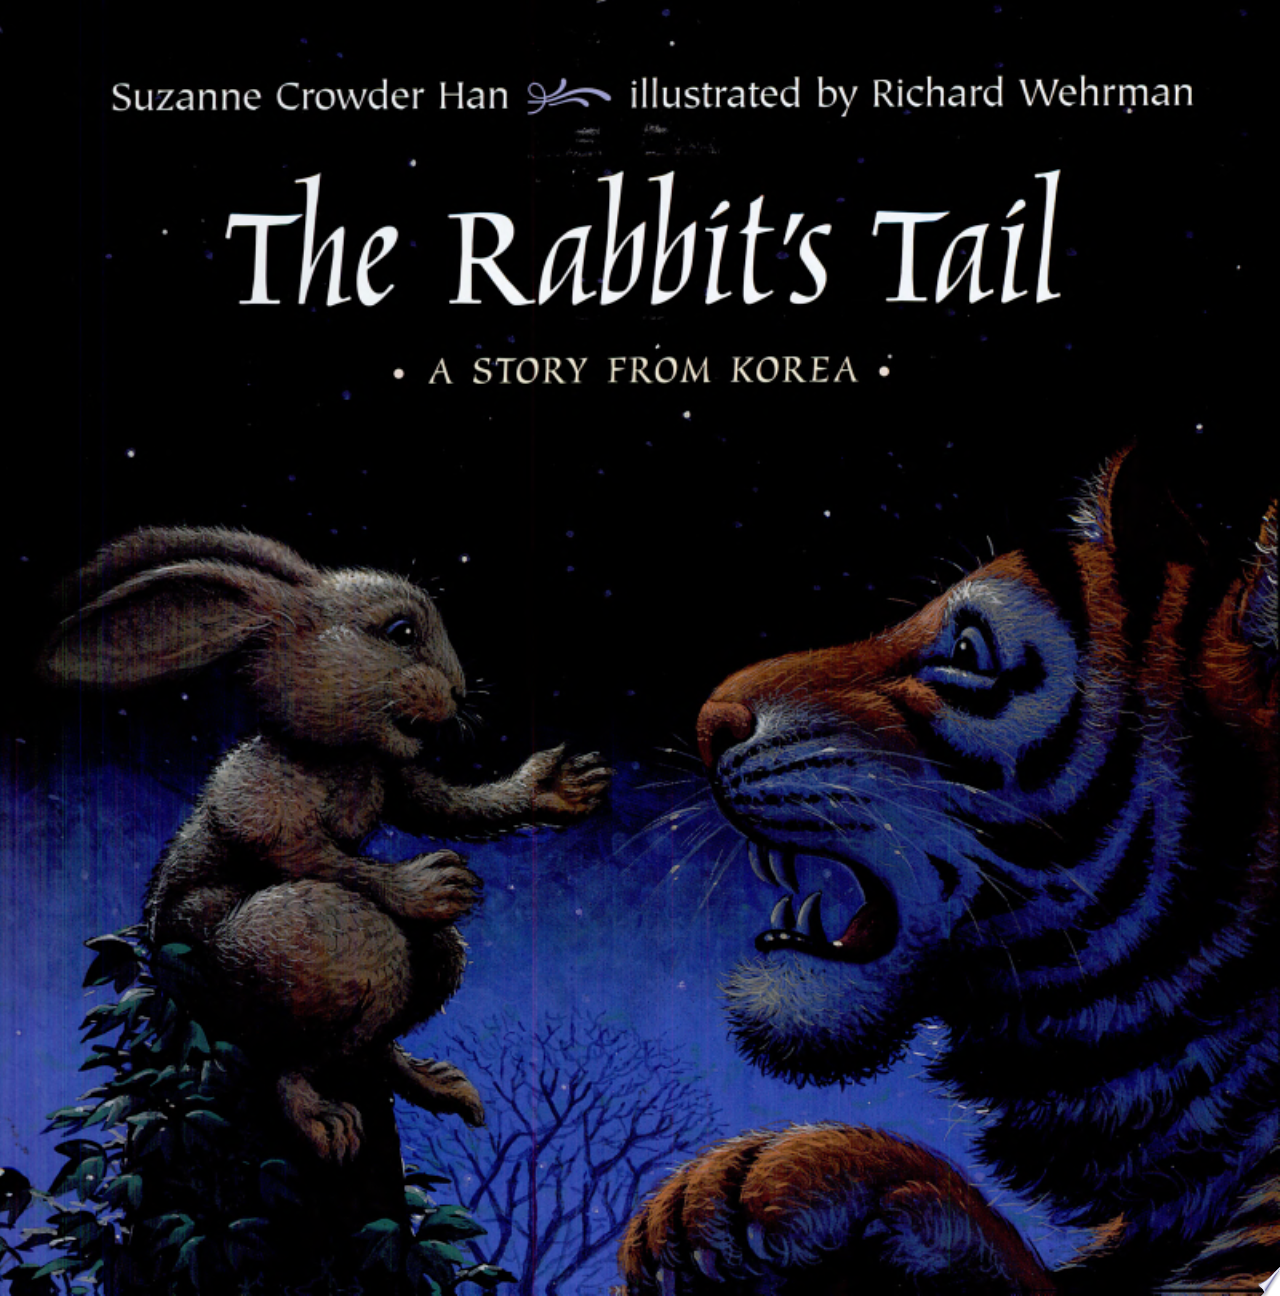 Image for "The Rabbit's Tail"